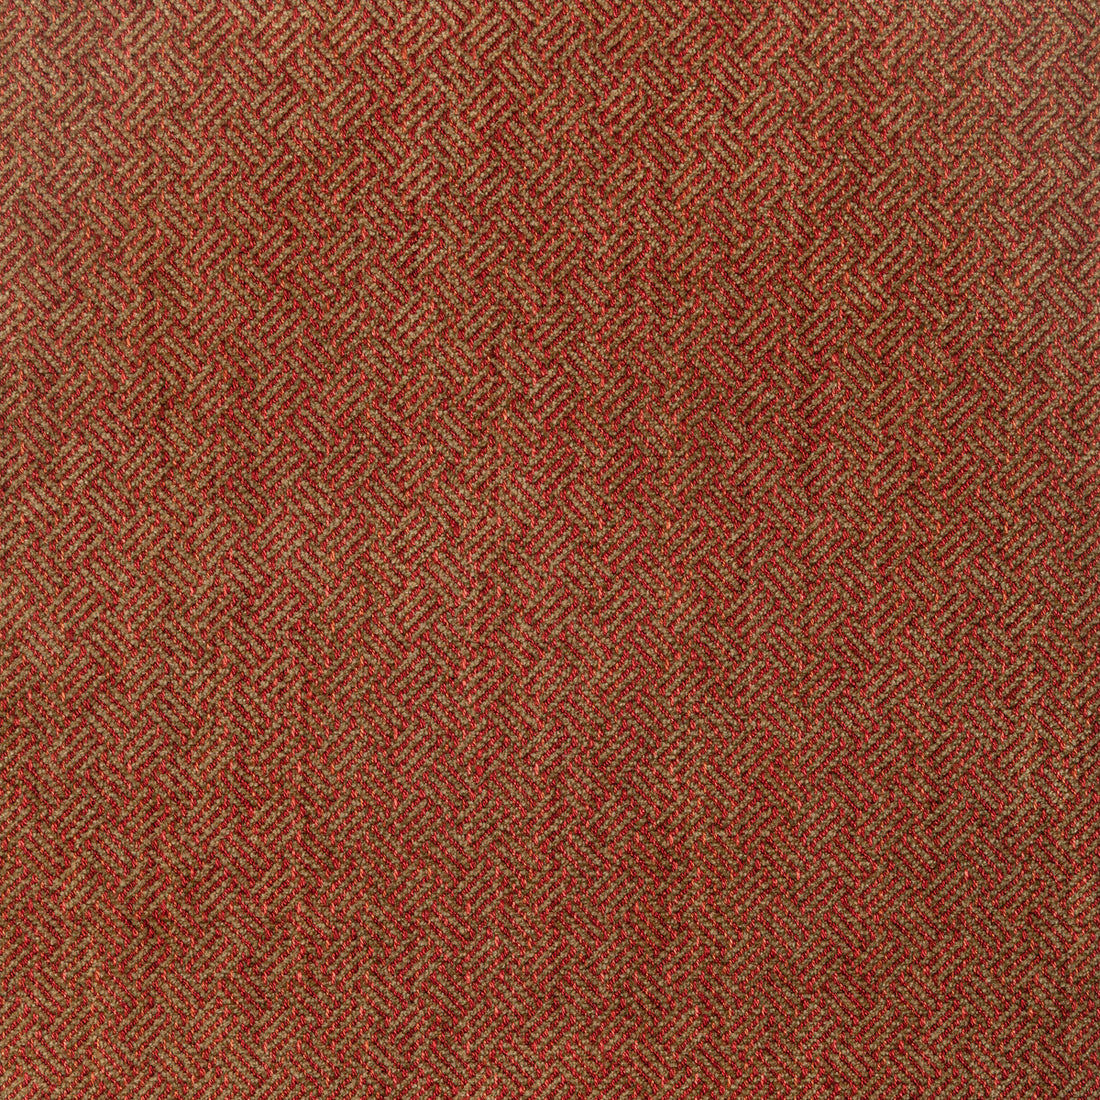 Leon Weave fabric in brick color - pattern 2021109.19.0 - by Lee Jofa in the Triana Weaves collection